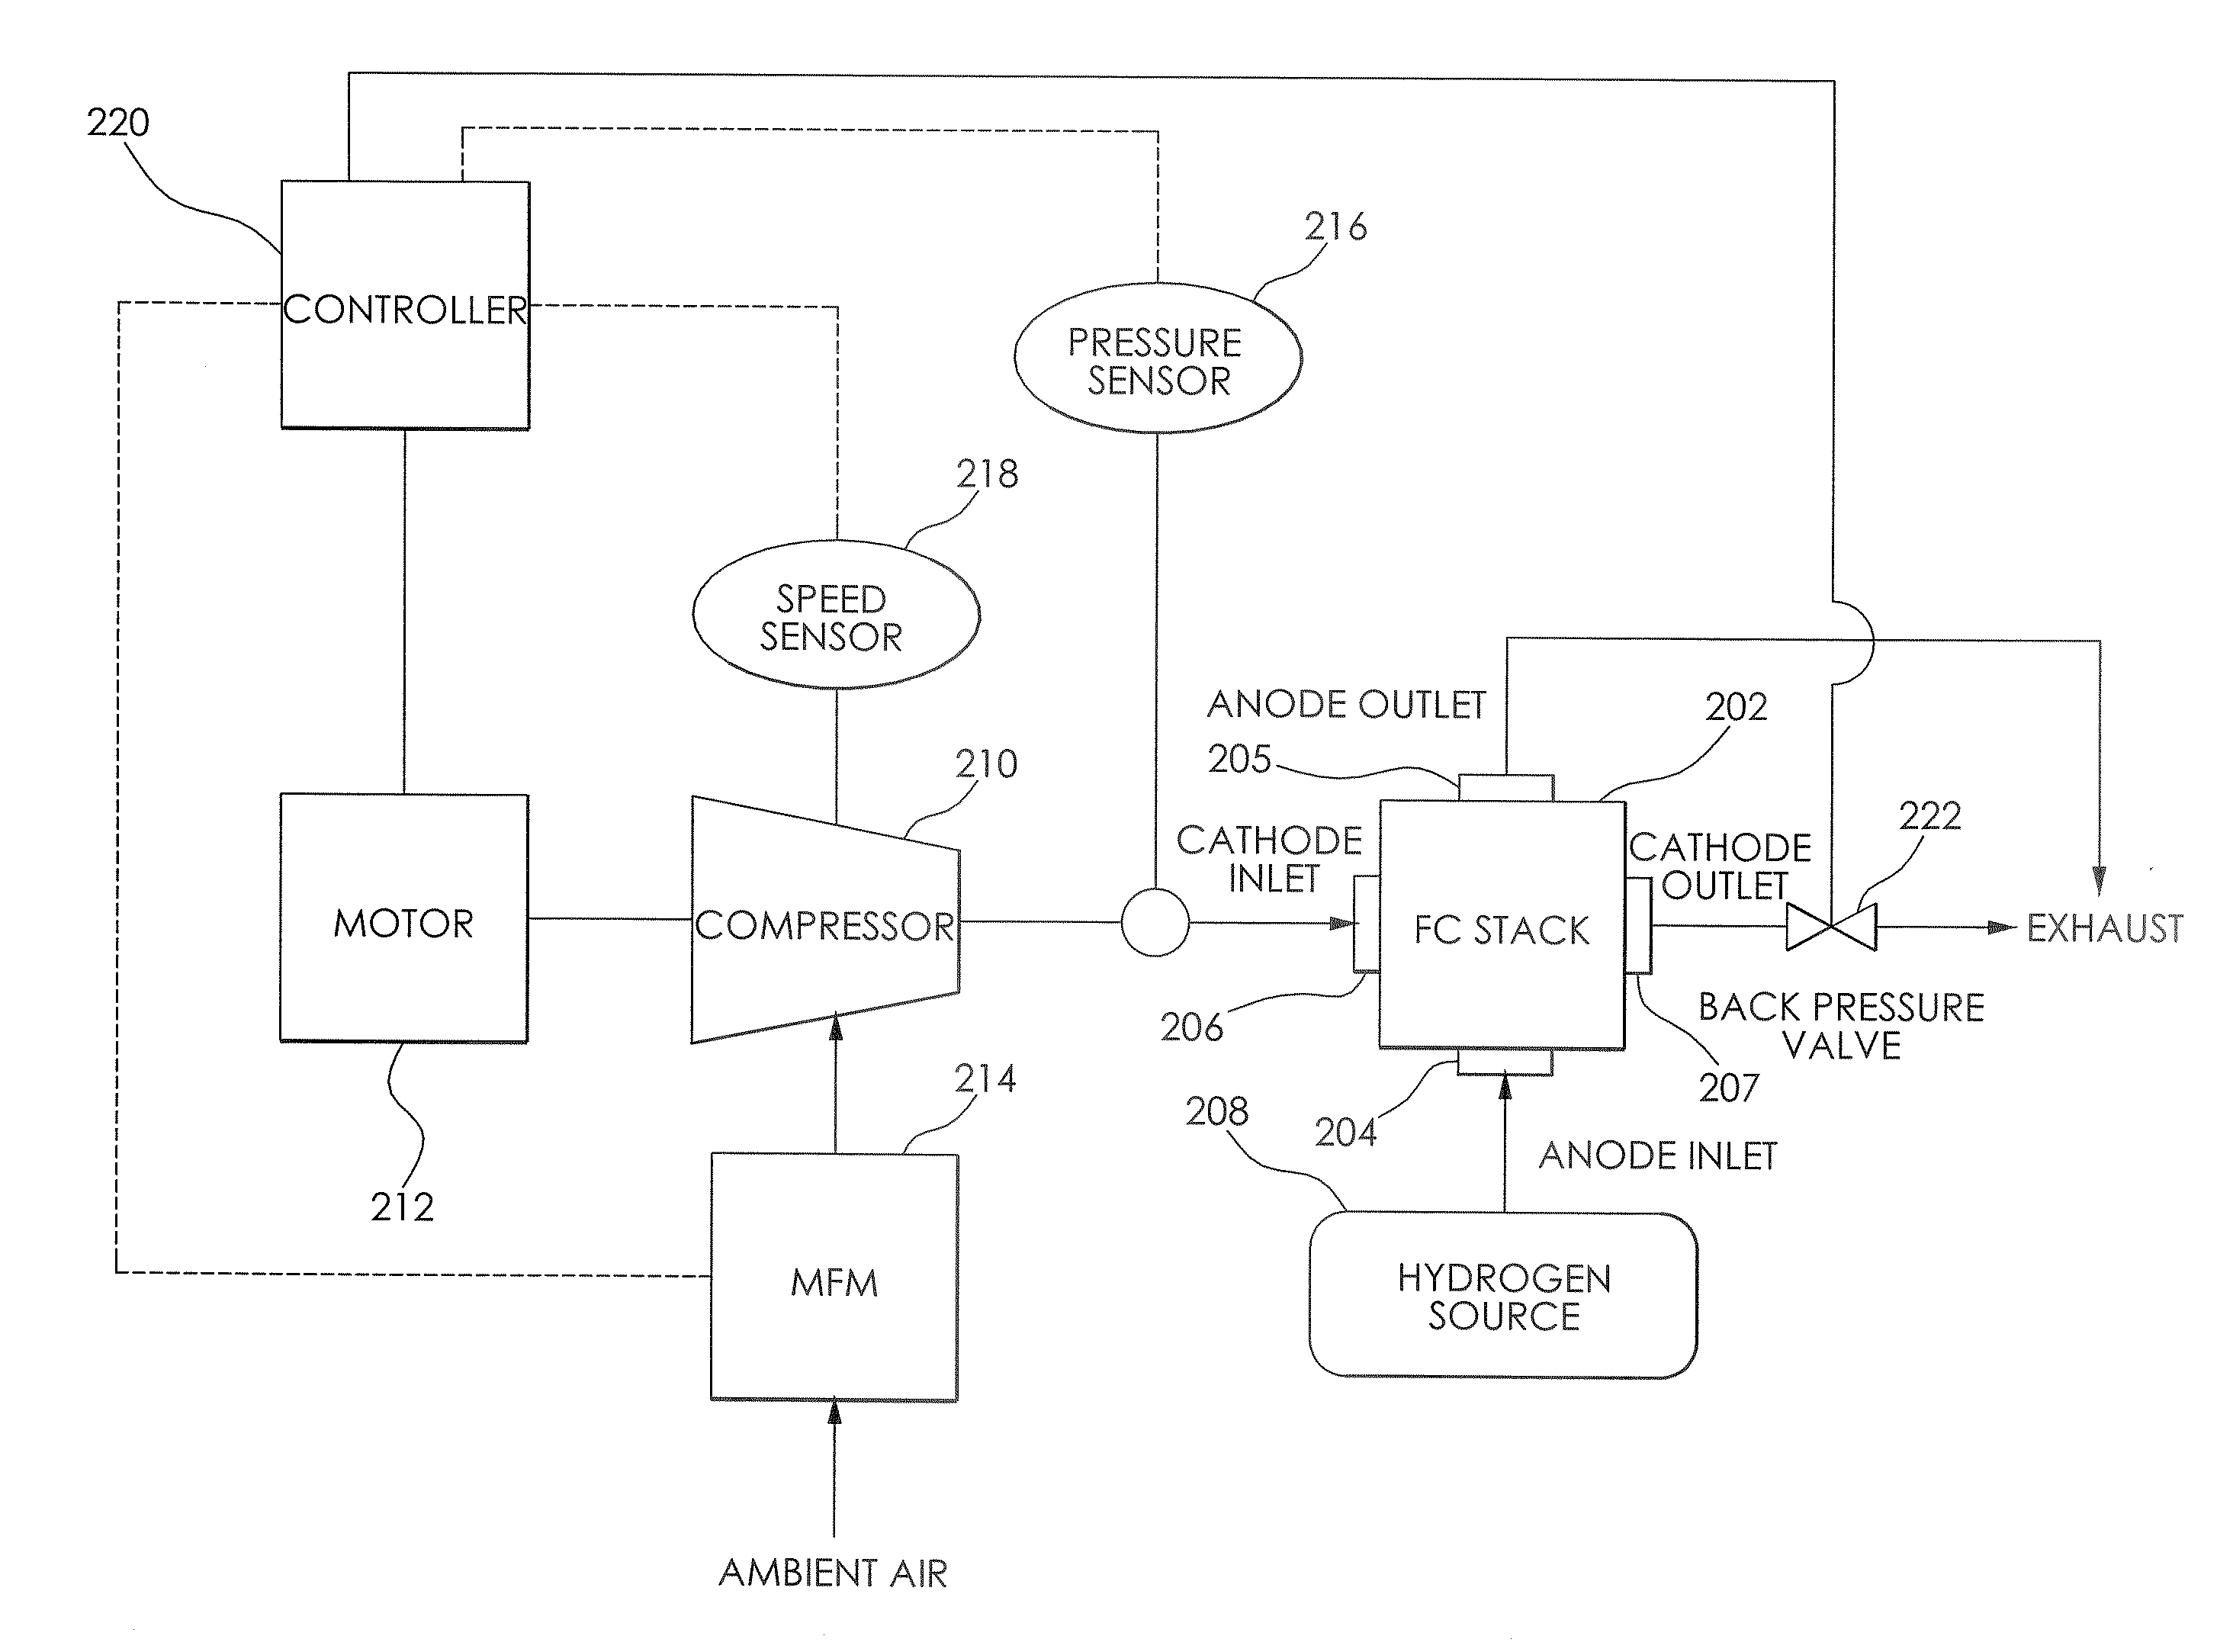 Adaptive compressor surge control in a fuel cell system